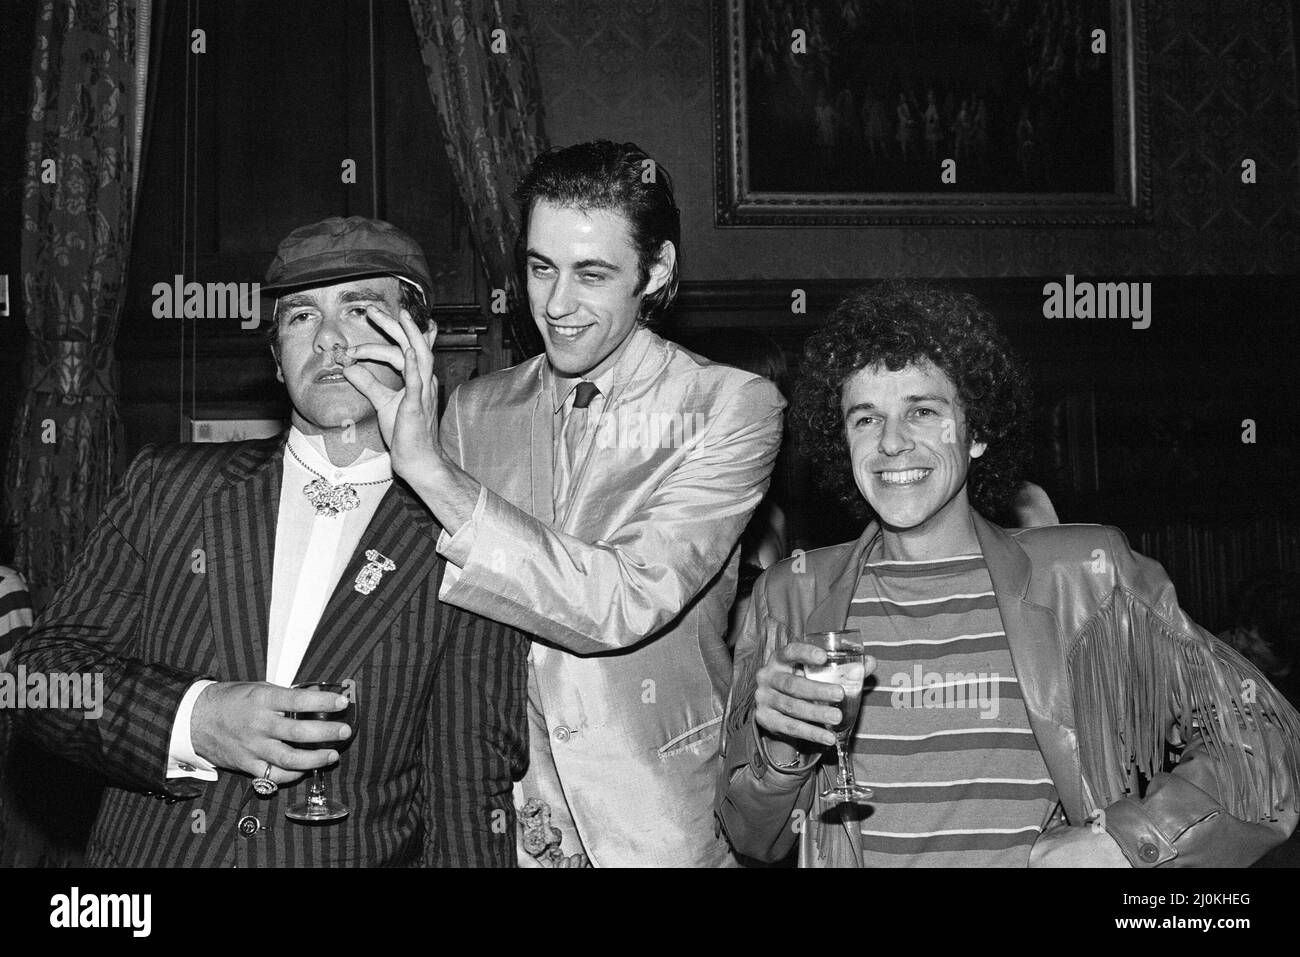 Elton John, Bob Geldof and Leo Sayer attending a House of Commons reception, invited along with other pop stars by the Minister for the Arts, Norman St John-Stevas. 3rd August 1980. Stock Photo